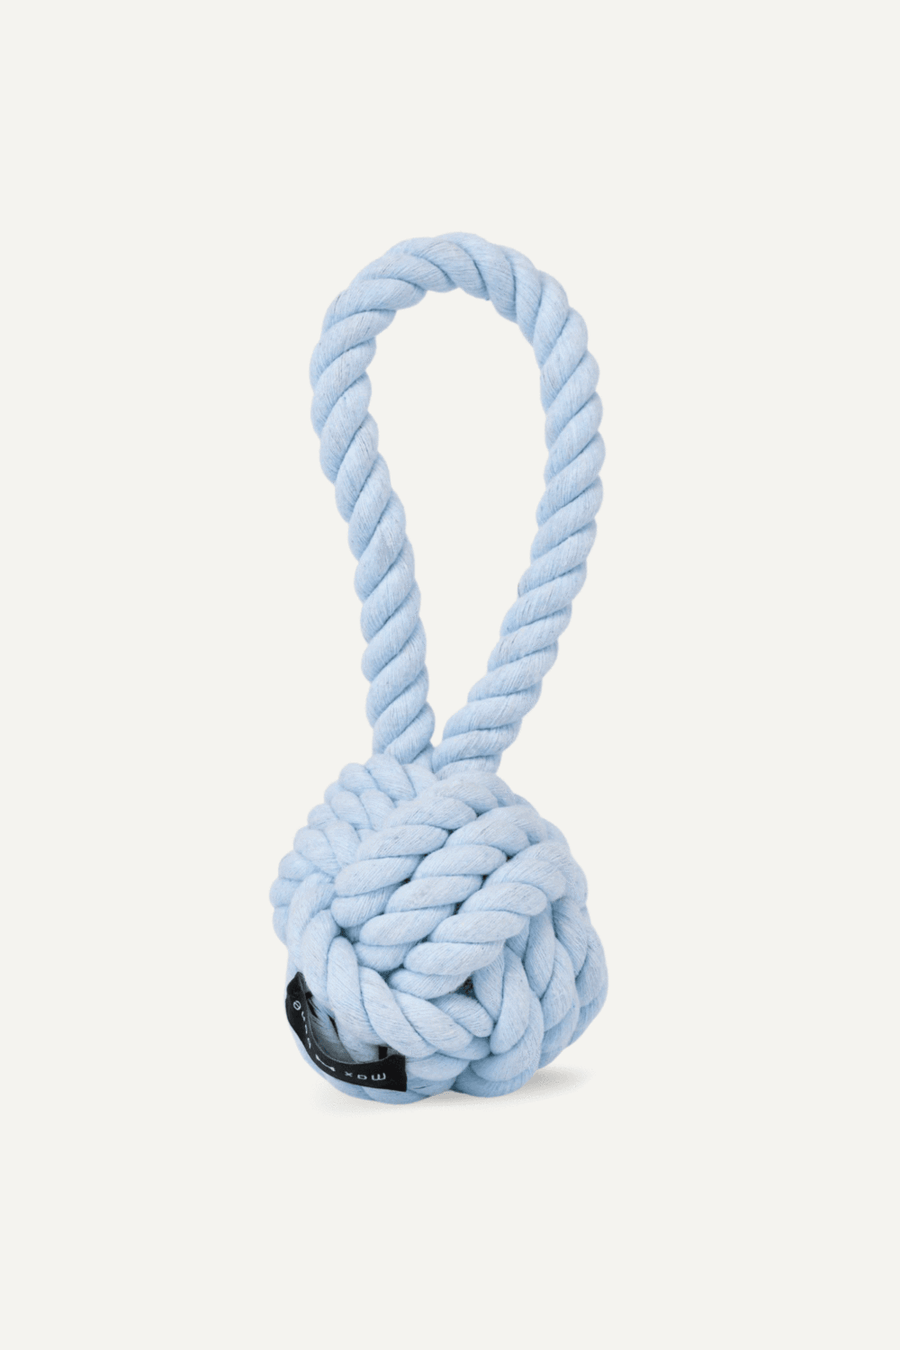 MAXBONE Large Twisted Rope Ball in Pink, Blue, Lavender & Mint